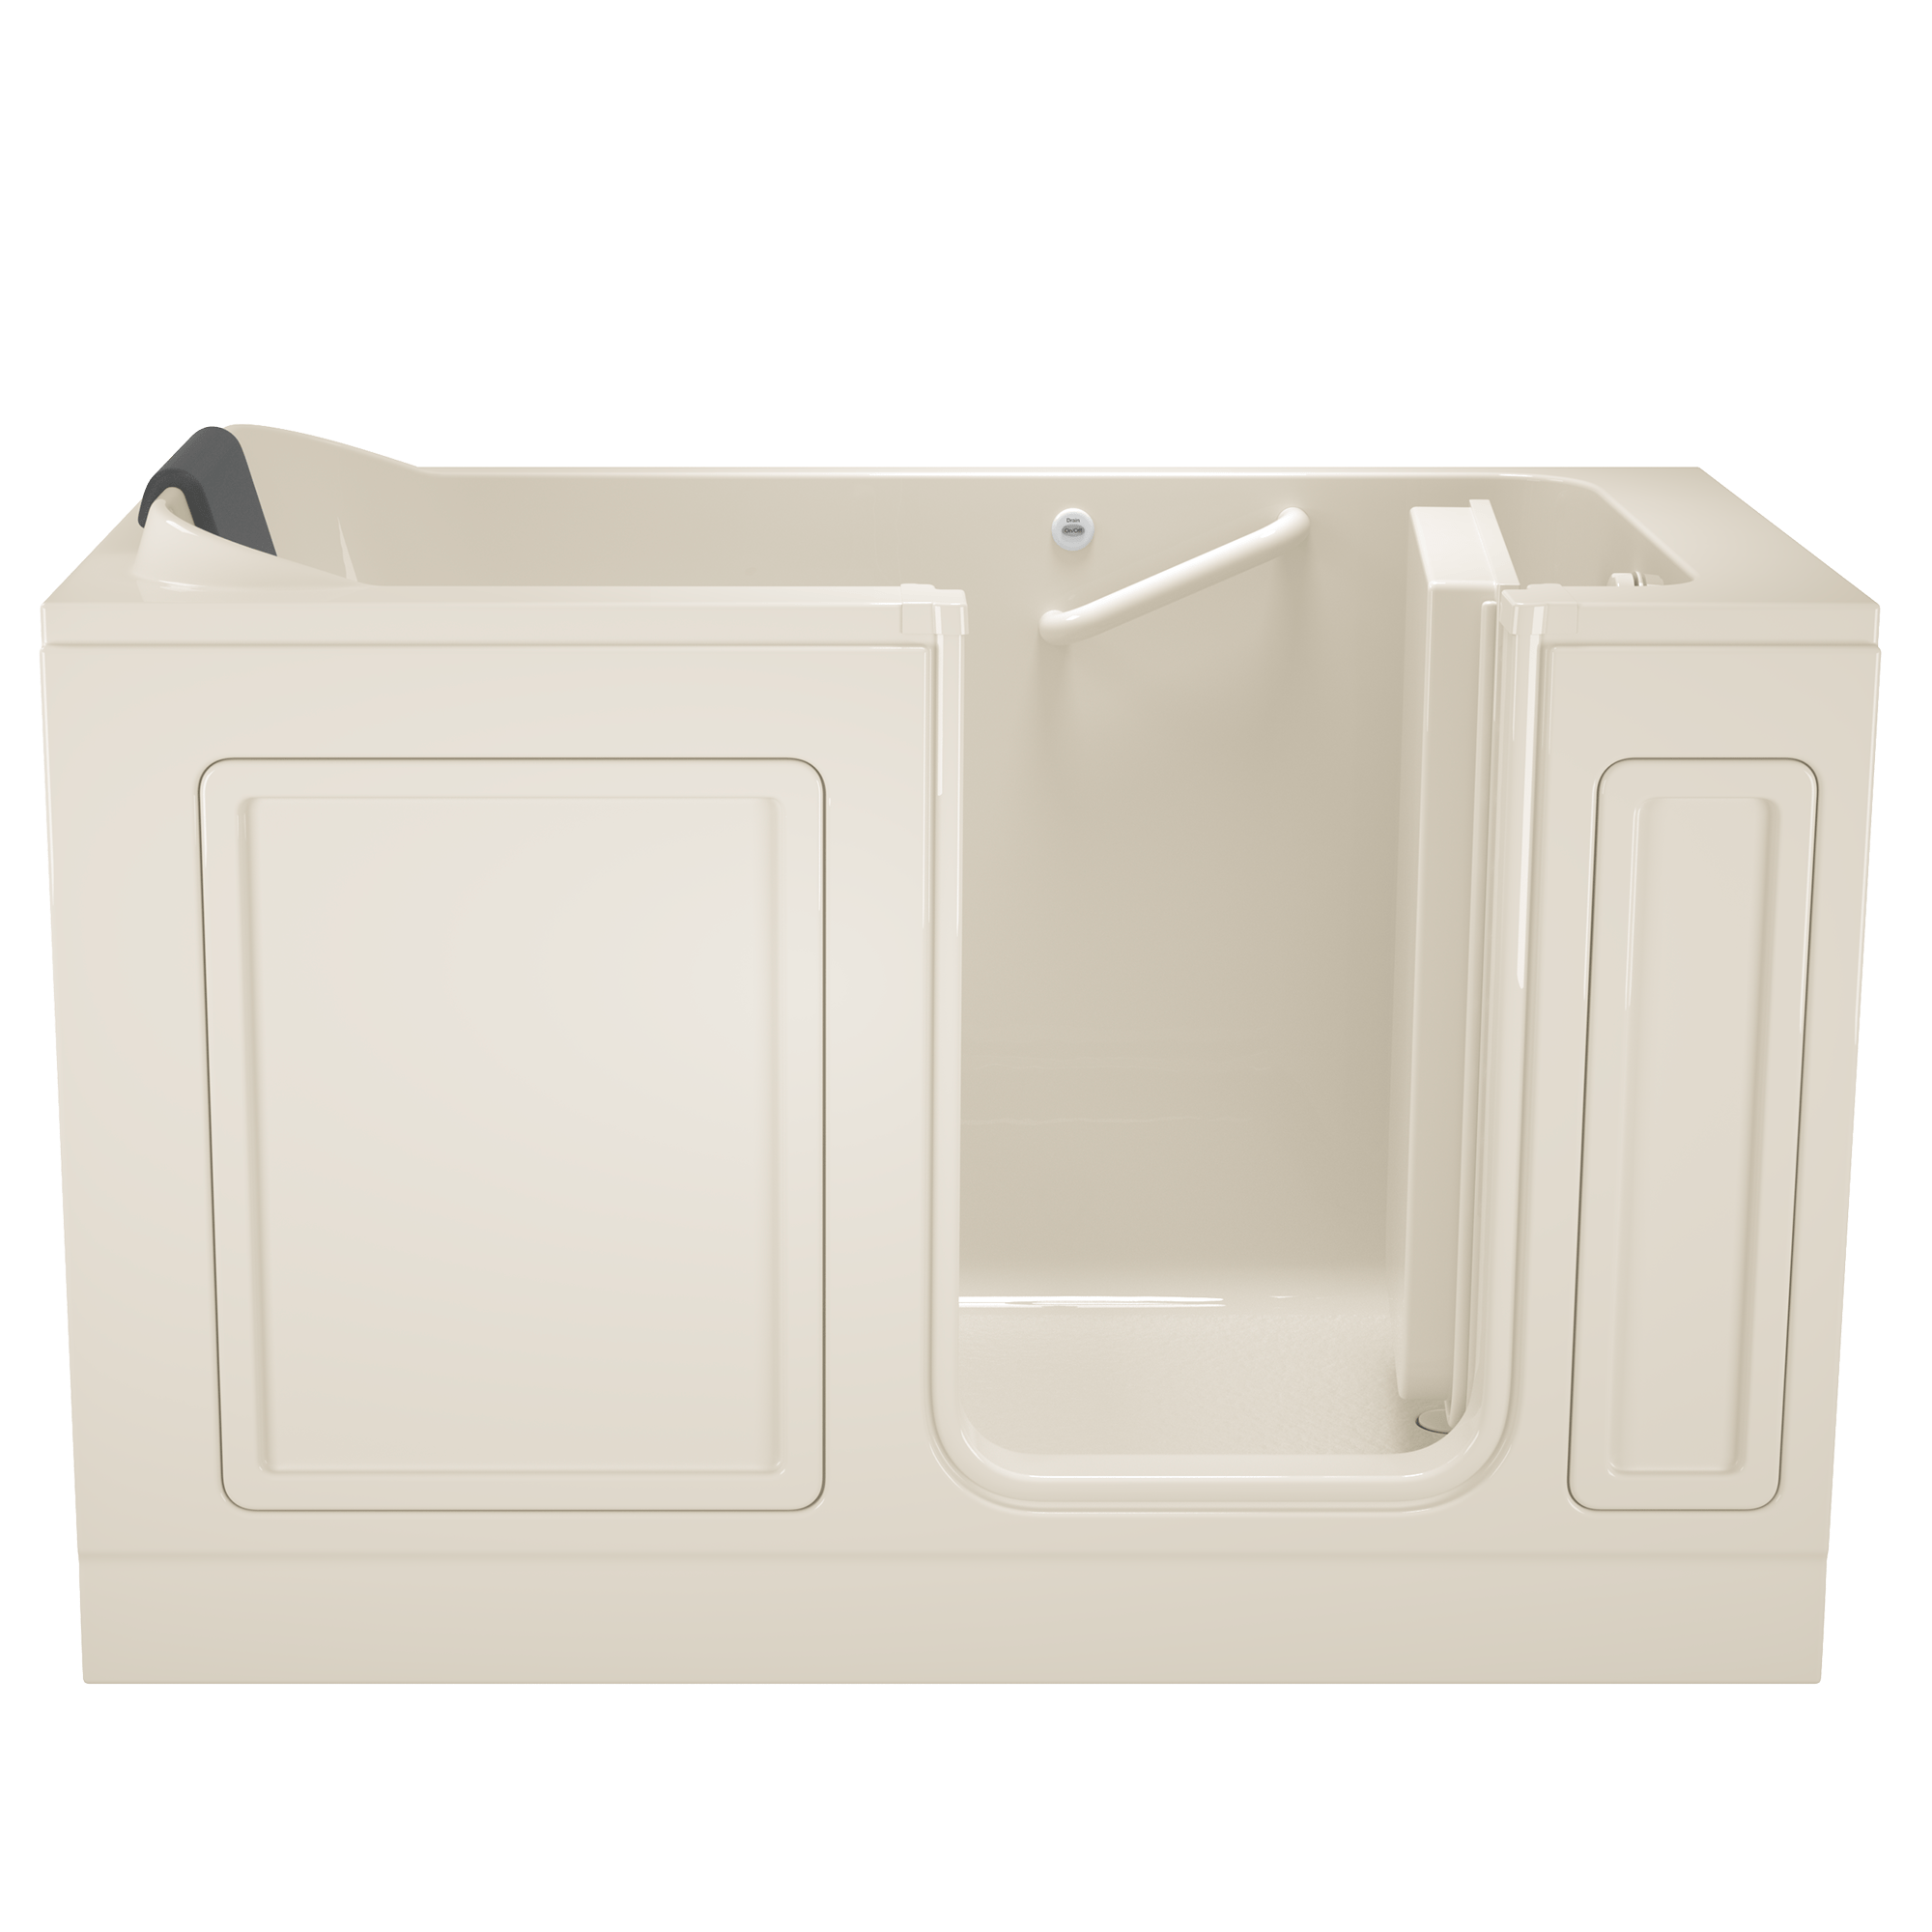 Acrylic Luxury Series 32 x 60  Inch Walk in Tub With Soaker System   Right Hand Drain WIB LINEN